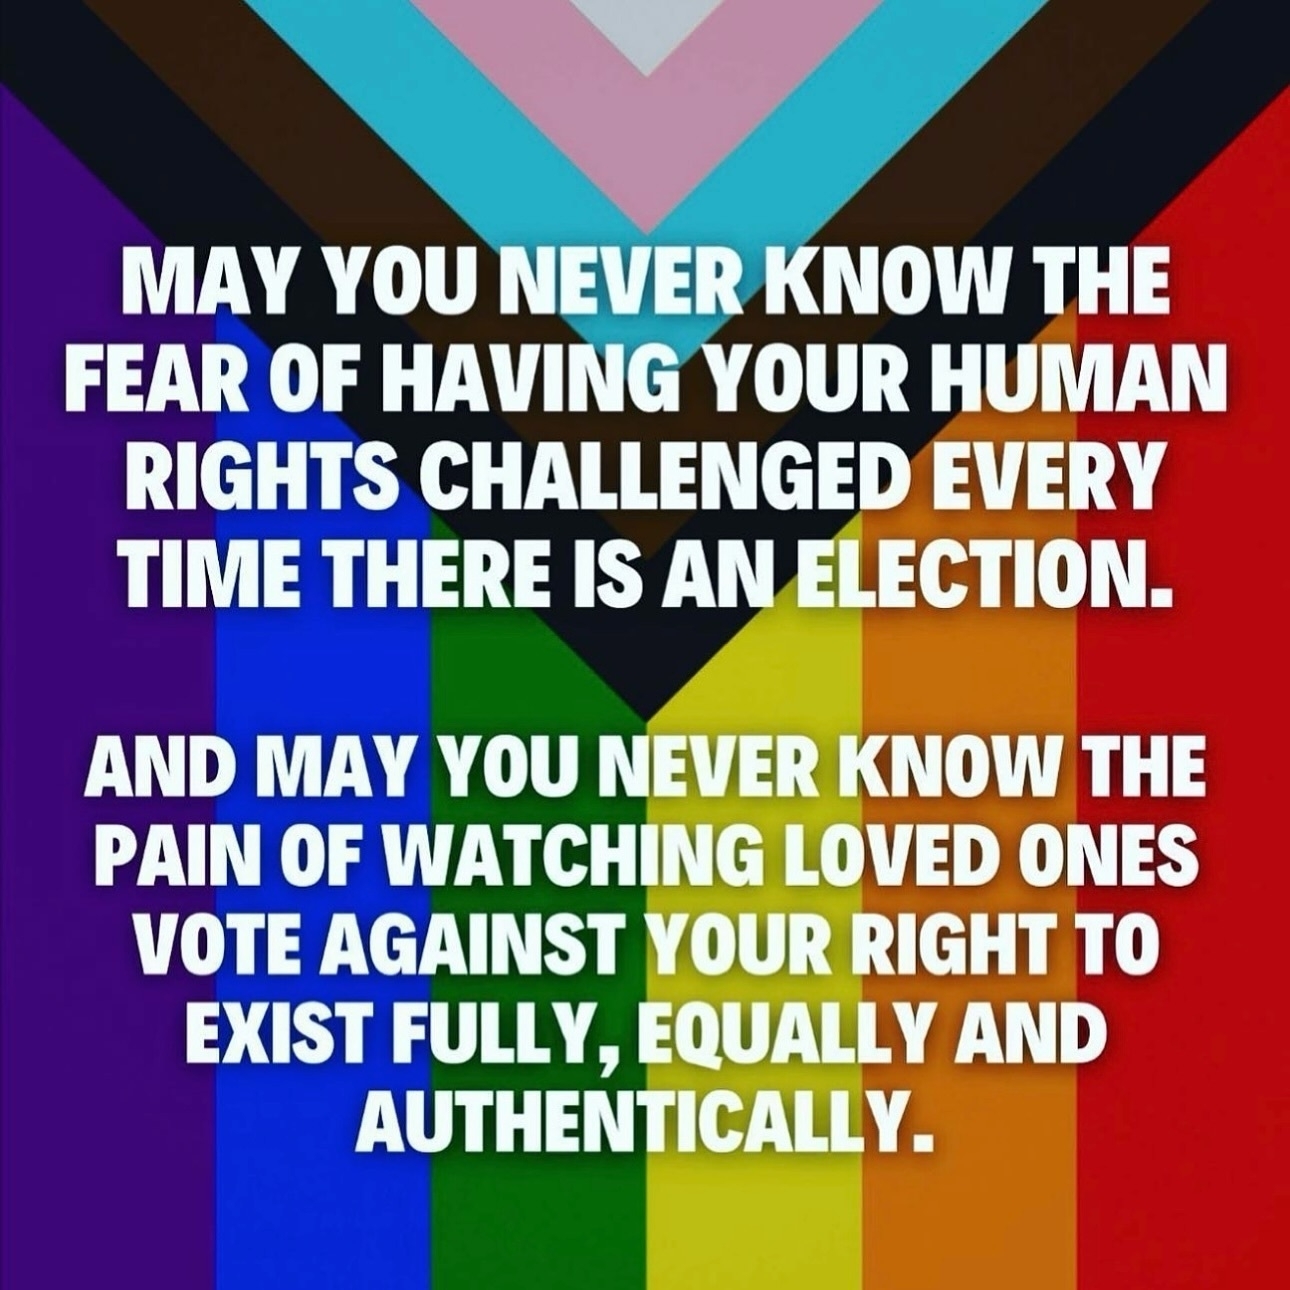 Text over a multicolored pride-rainbow background reads: 'MAY YOU NEVER KNOW THE FEAR OF HAVING YOUR HUMAN RIGHTS CHALLENGED EVERY TIME THERE IS AN ELECTION. AND MAY YOU NEVER KNOW THE PAIN OF WATCHING LOVED ONES VOTE AGAINST YOUR RIGHT TO EXIST FULLY, EQUALLY AND AUTHENTICALLY.'